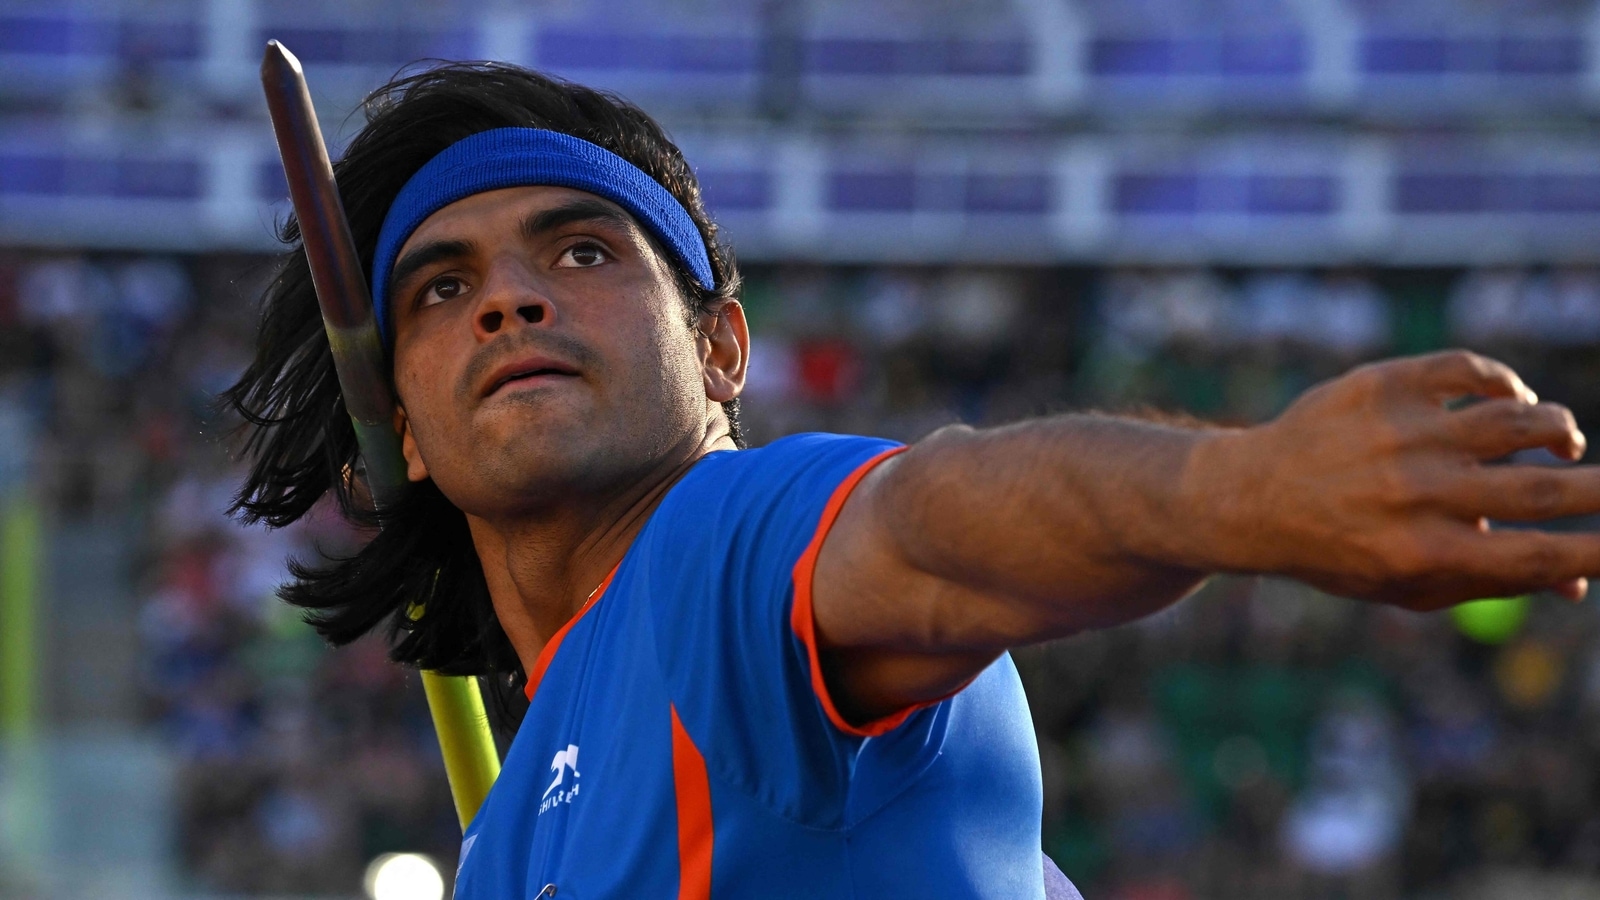 neeraj-chopra-ruled-out-of-commonwealth-games-2022-due-to-injury